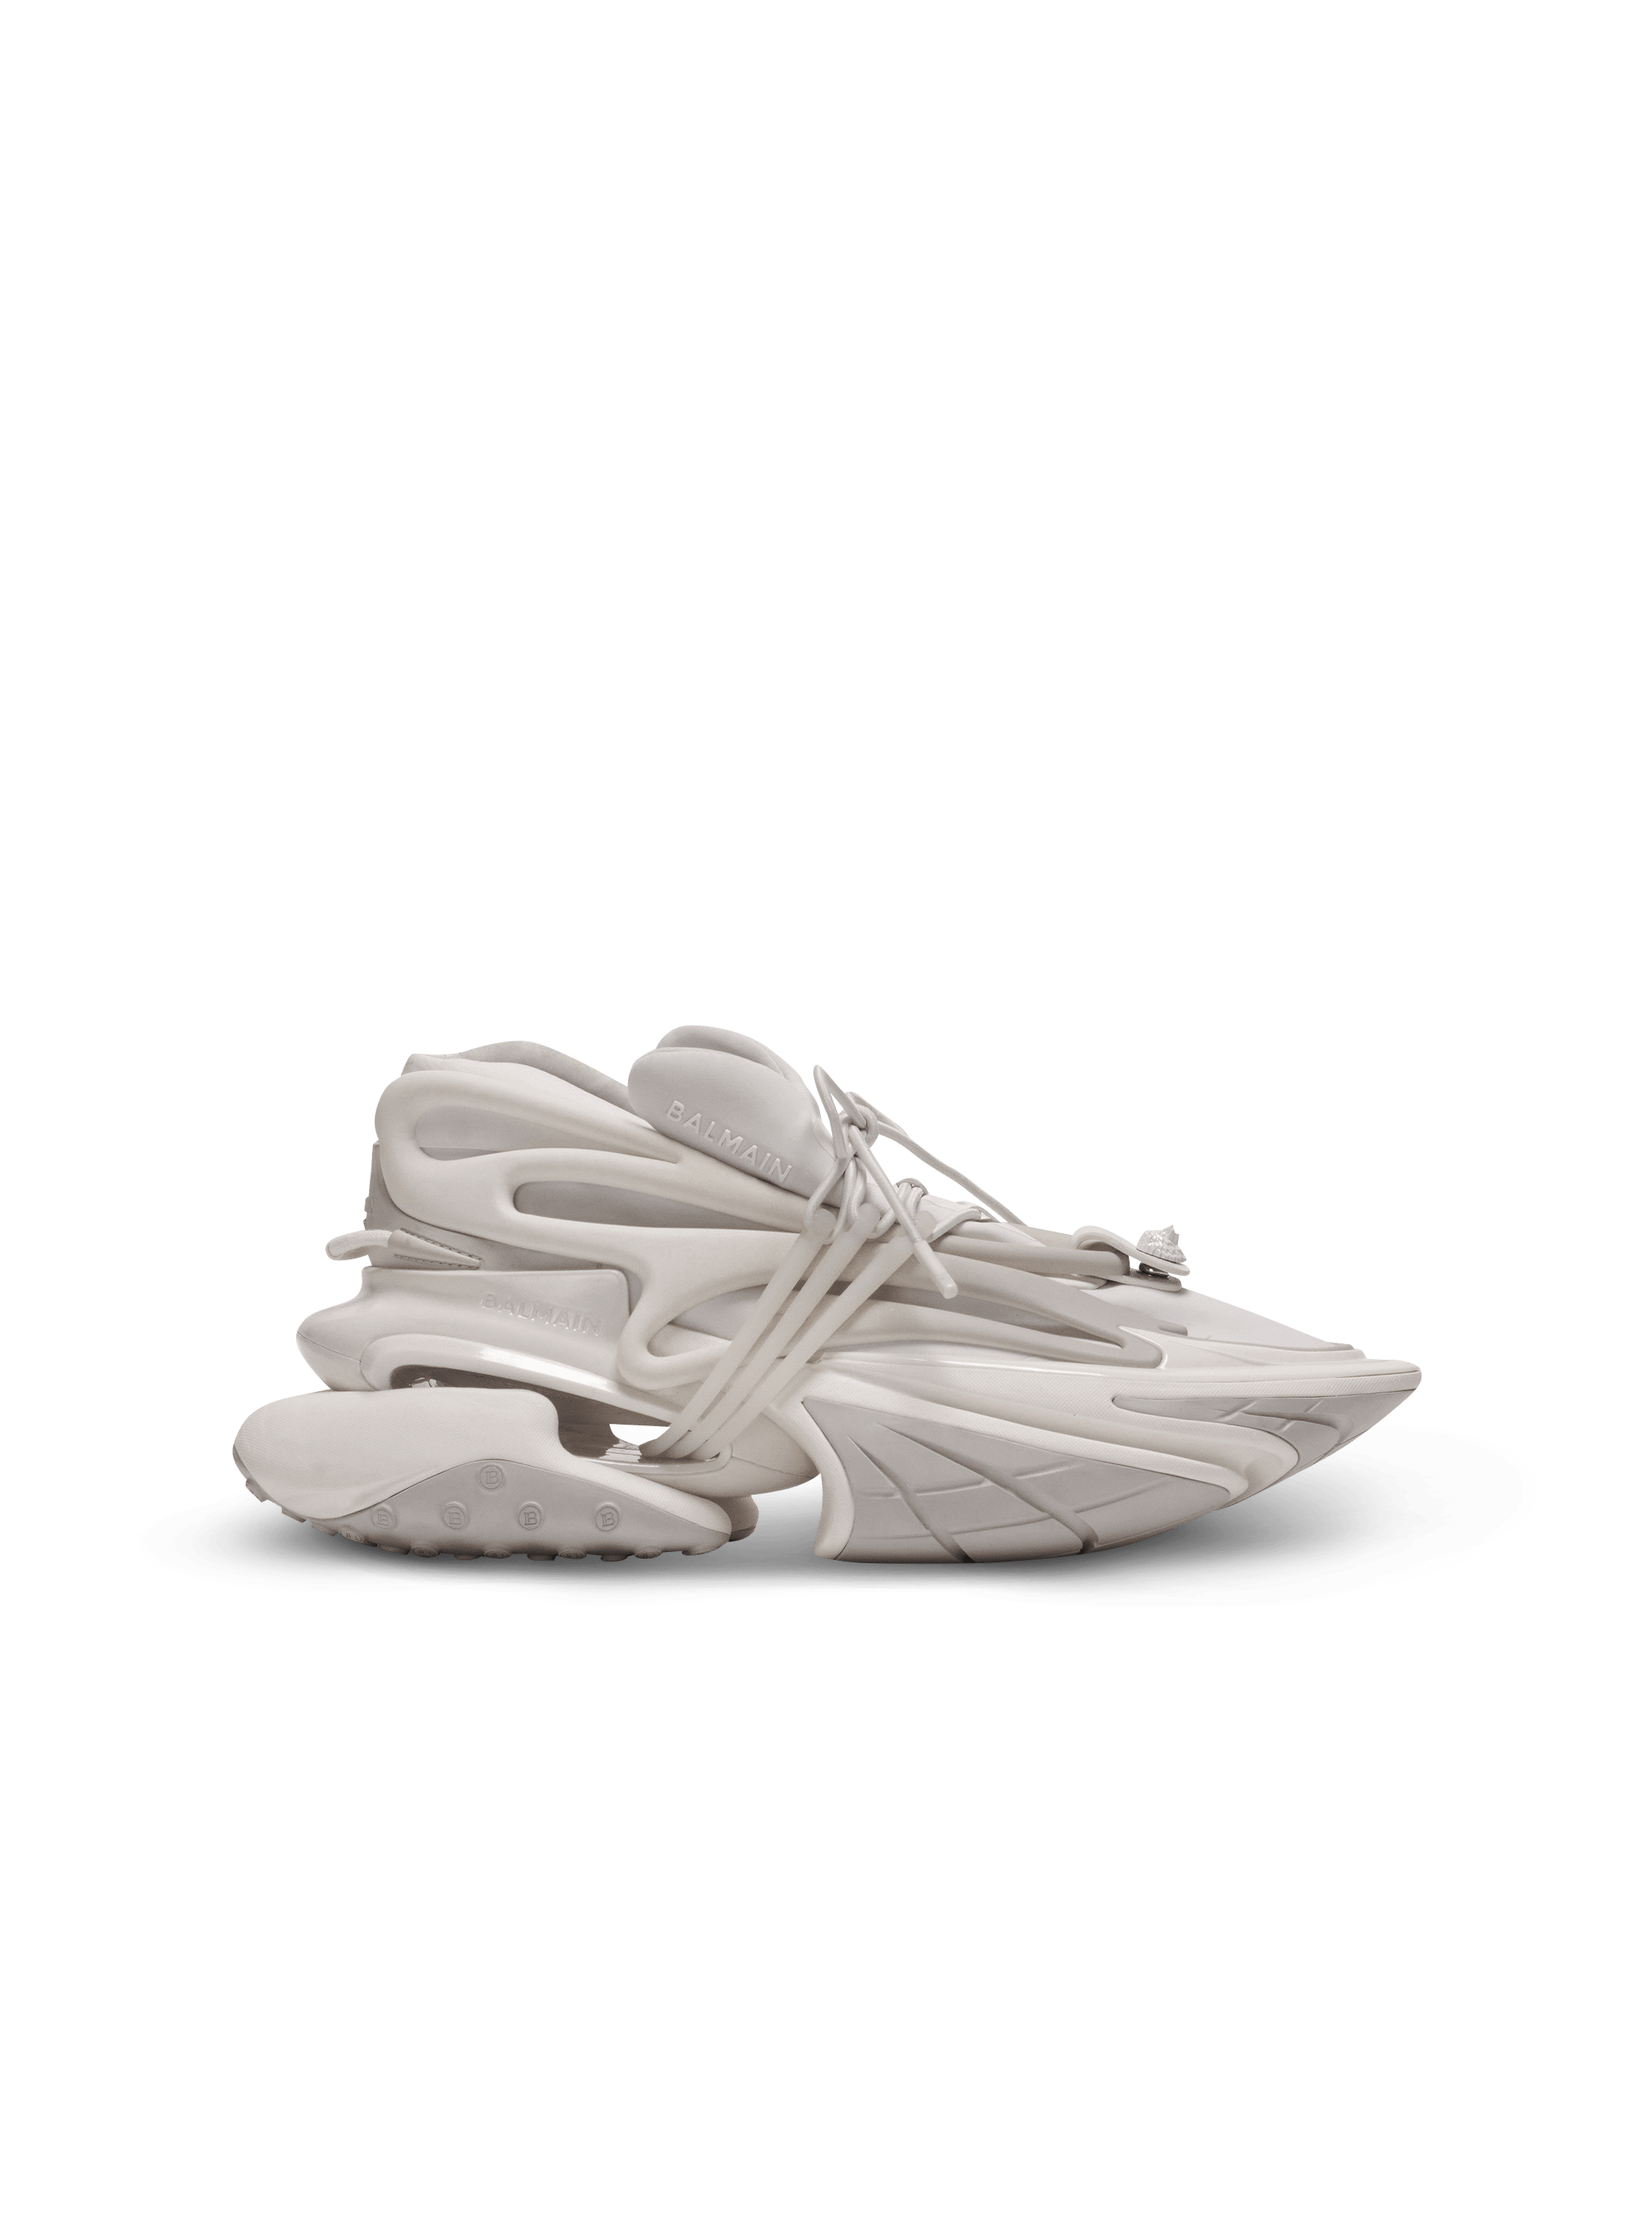 Neoprene and leather Unicorn low-top sneakers, white, hi-res